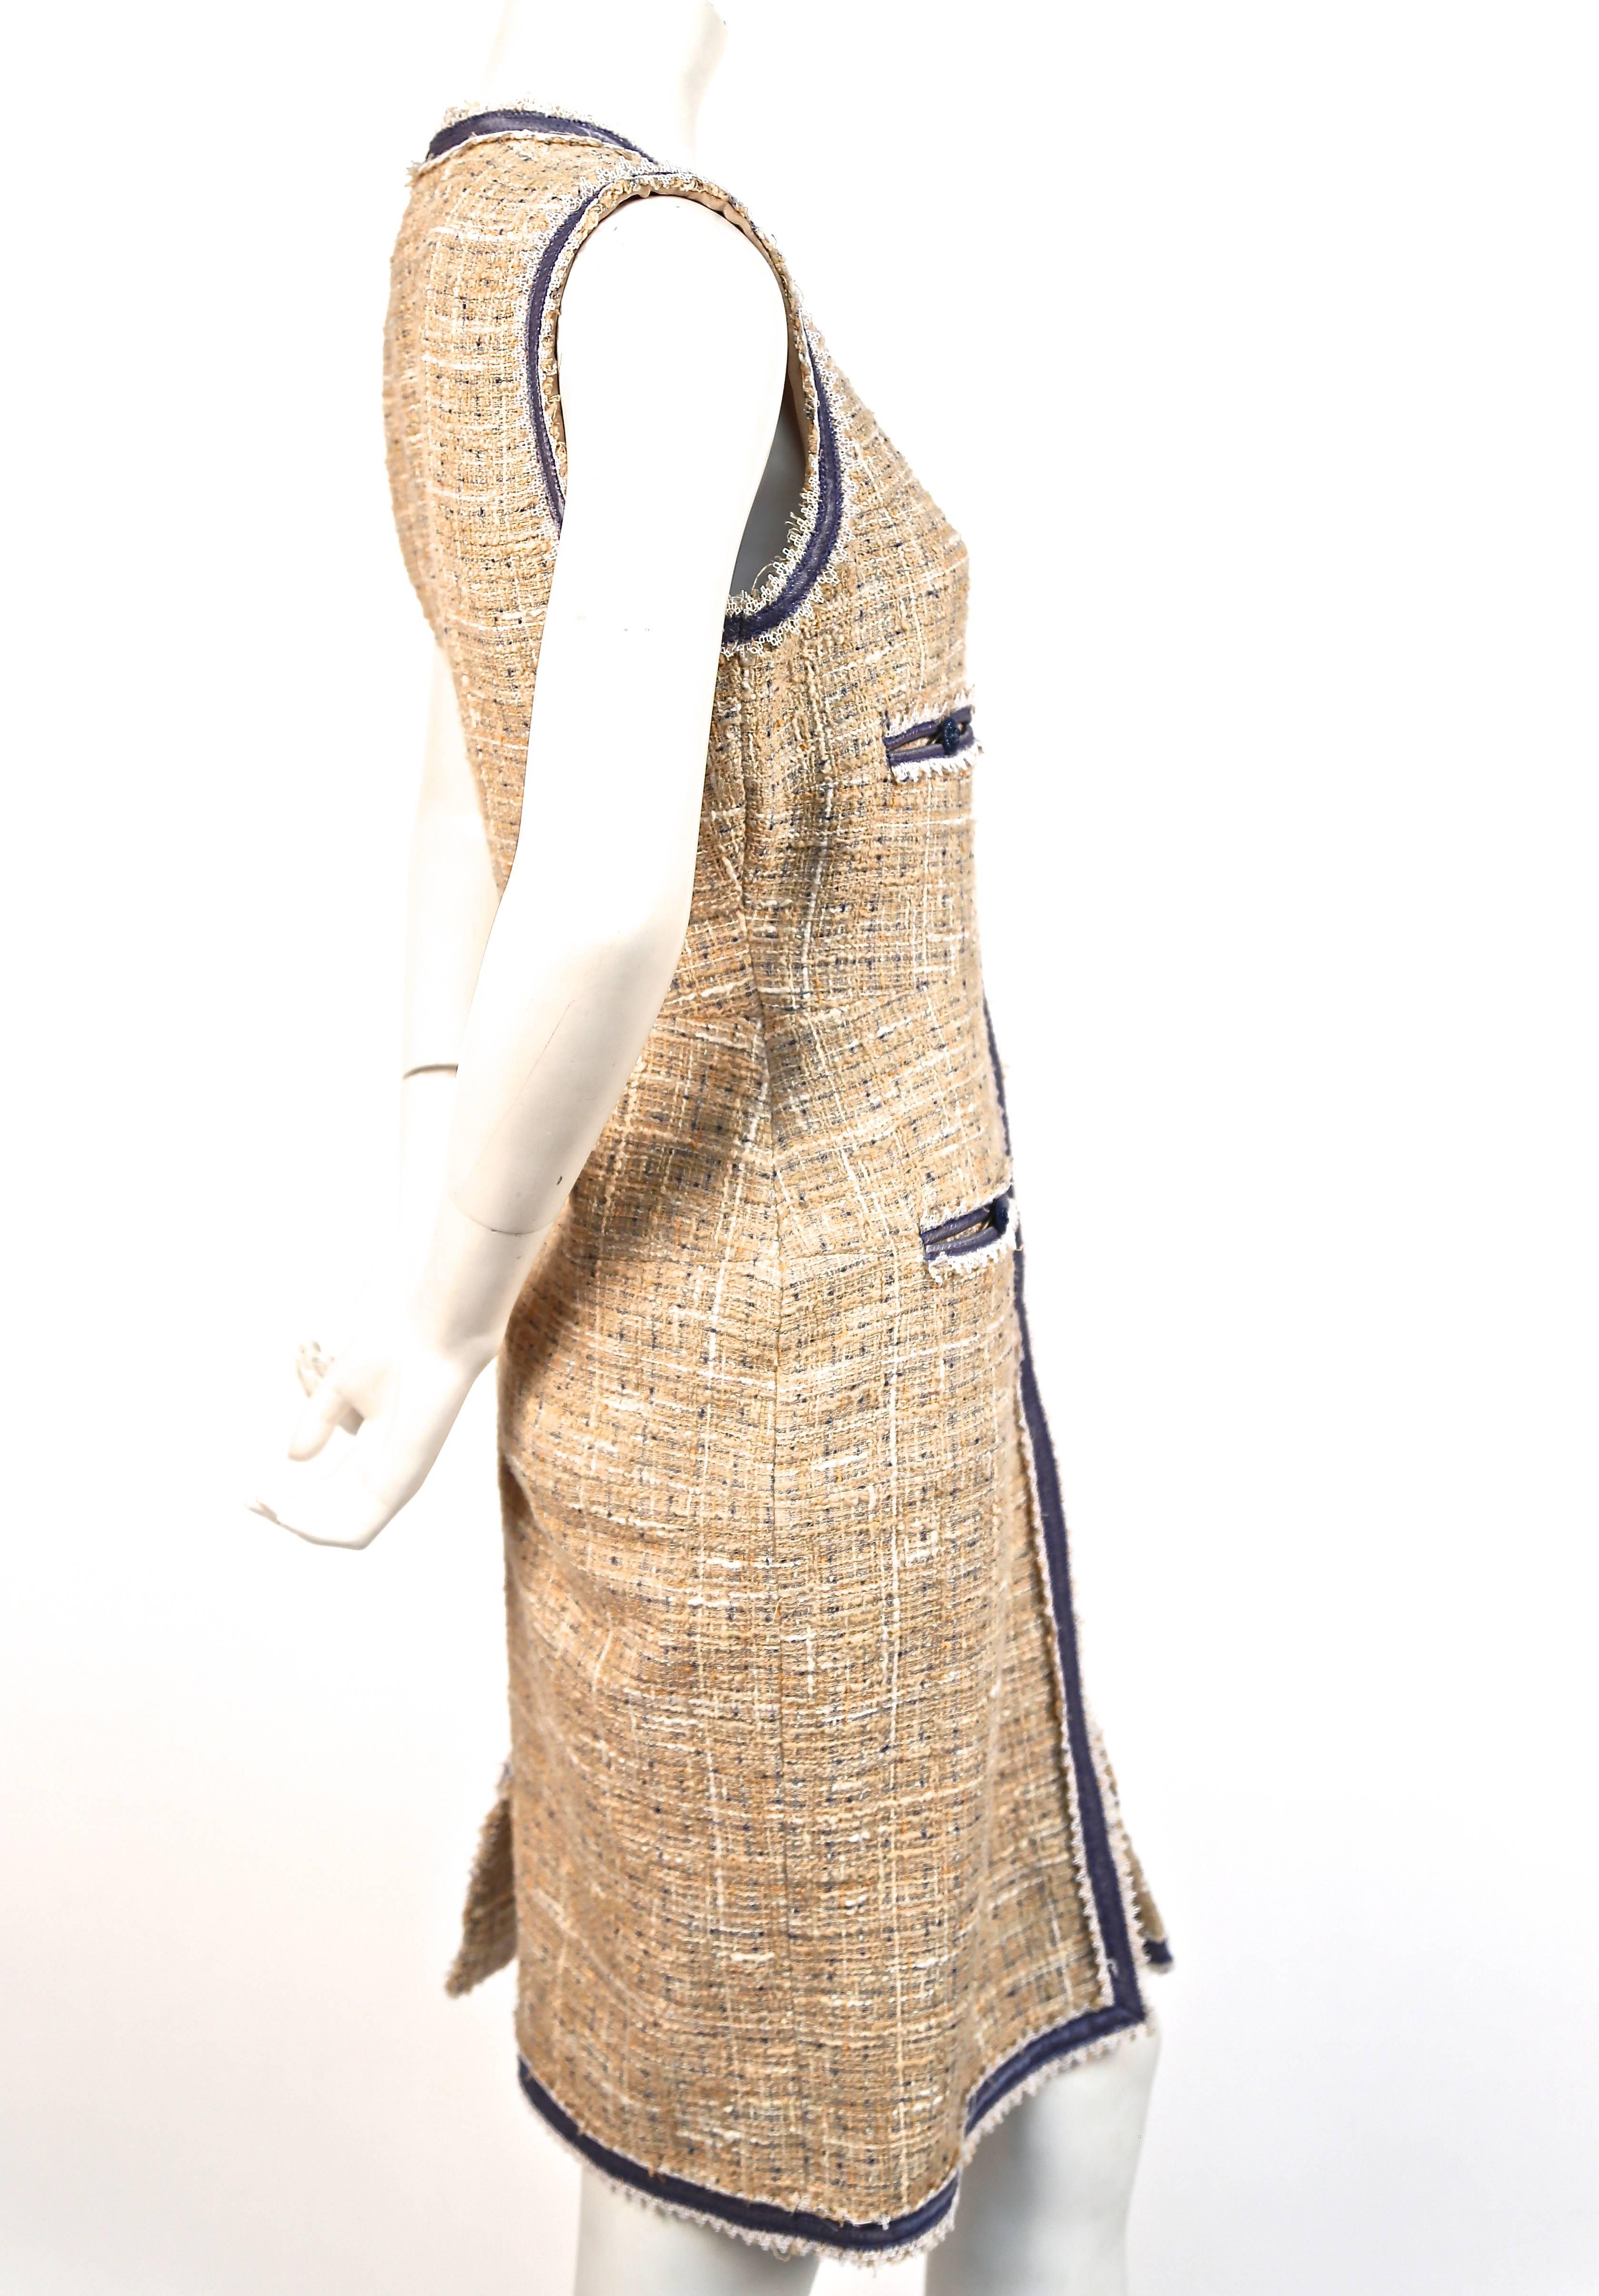 Tan, cream and blue Lesage tweed dress with lace trim and full two-way silver toned zipper from Chanel dating to spring of 2009. Labeled a French size 42. Approximate measurements: shoulder 15